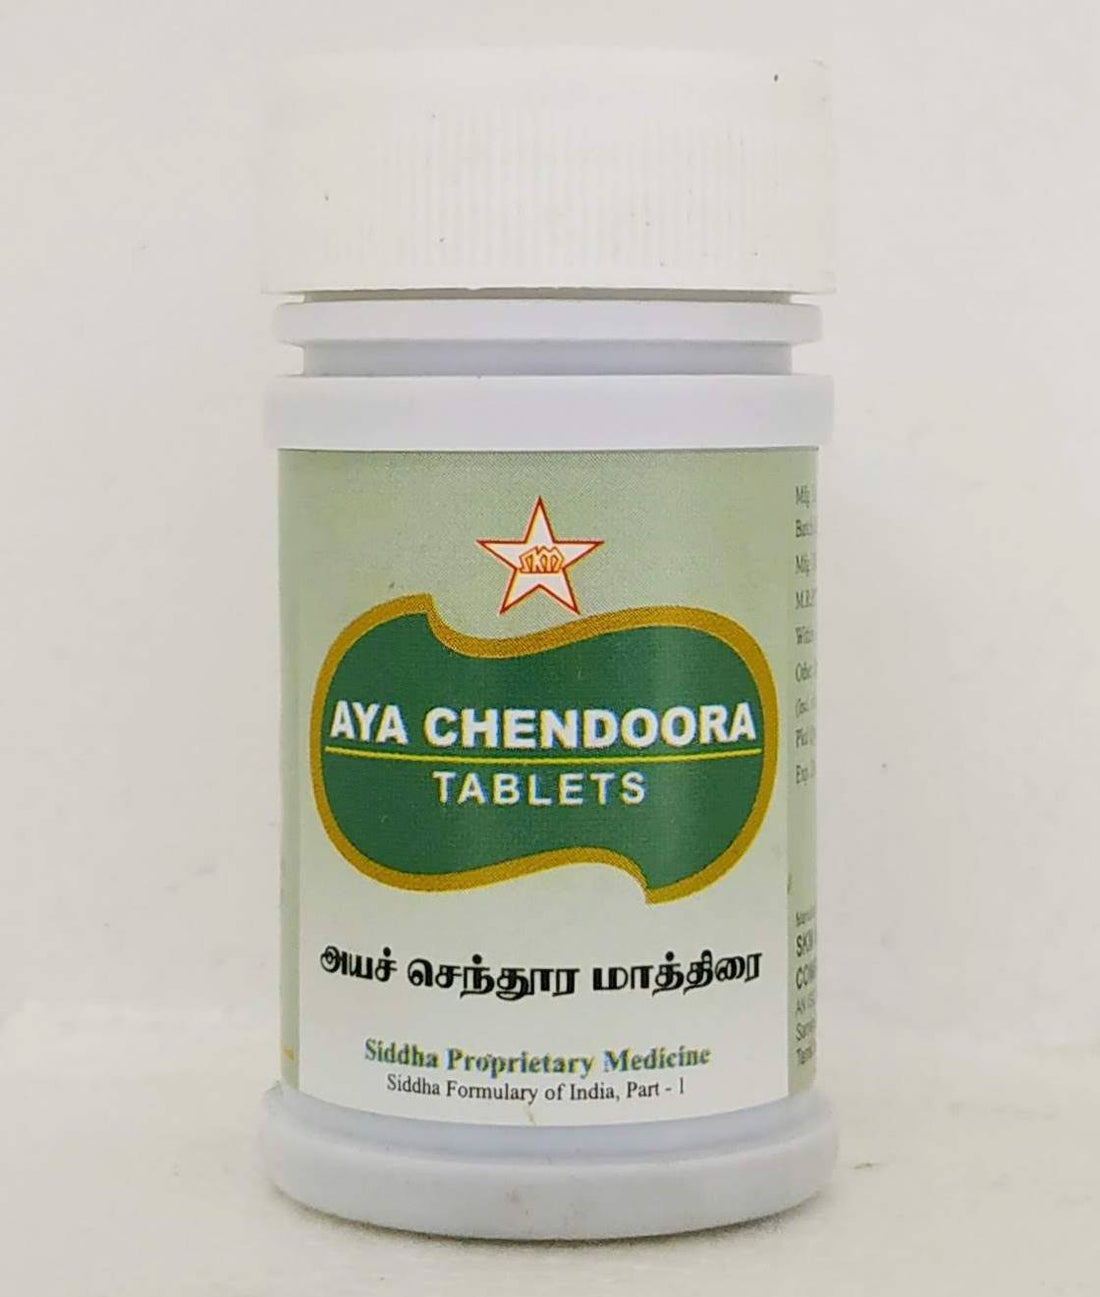 Shop Aya Chendooram Tablets - 100Tablets at price 100.00 from SKM Online - Ayush Care